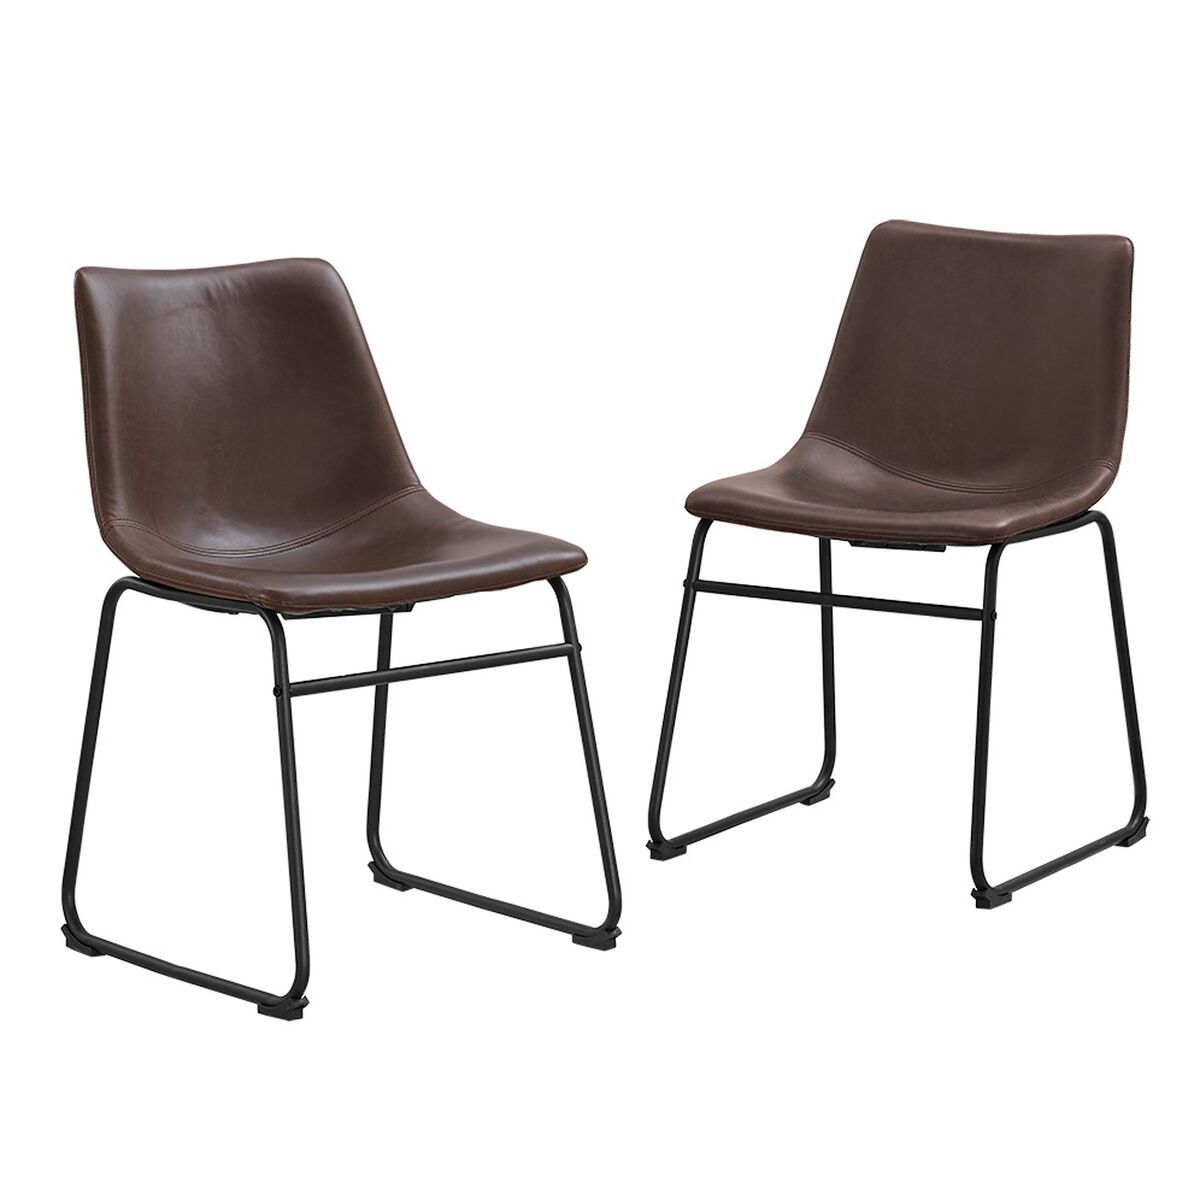 Brown Faux Leather Dining Chairs Set Of 2 Walker Edison Chl18br